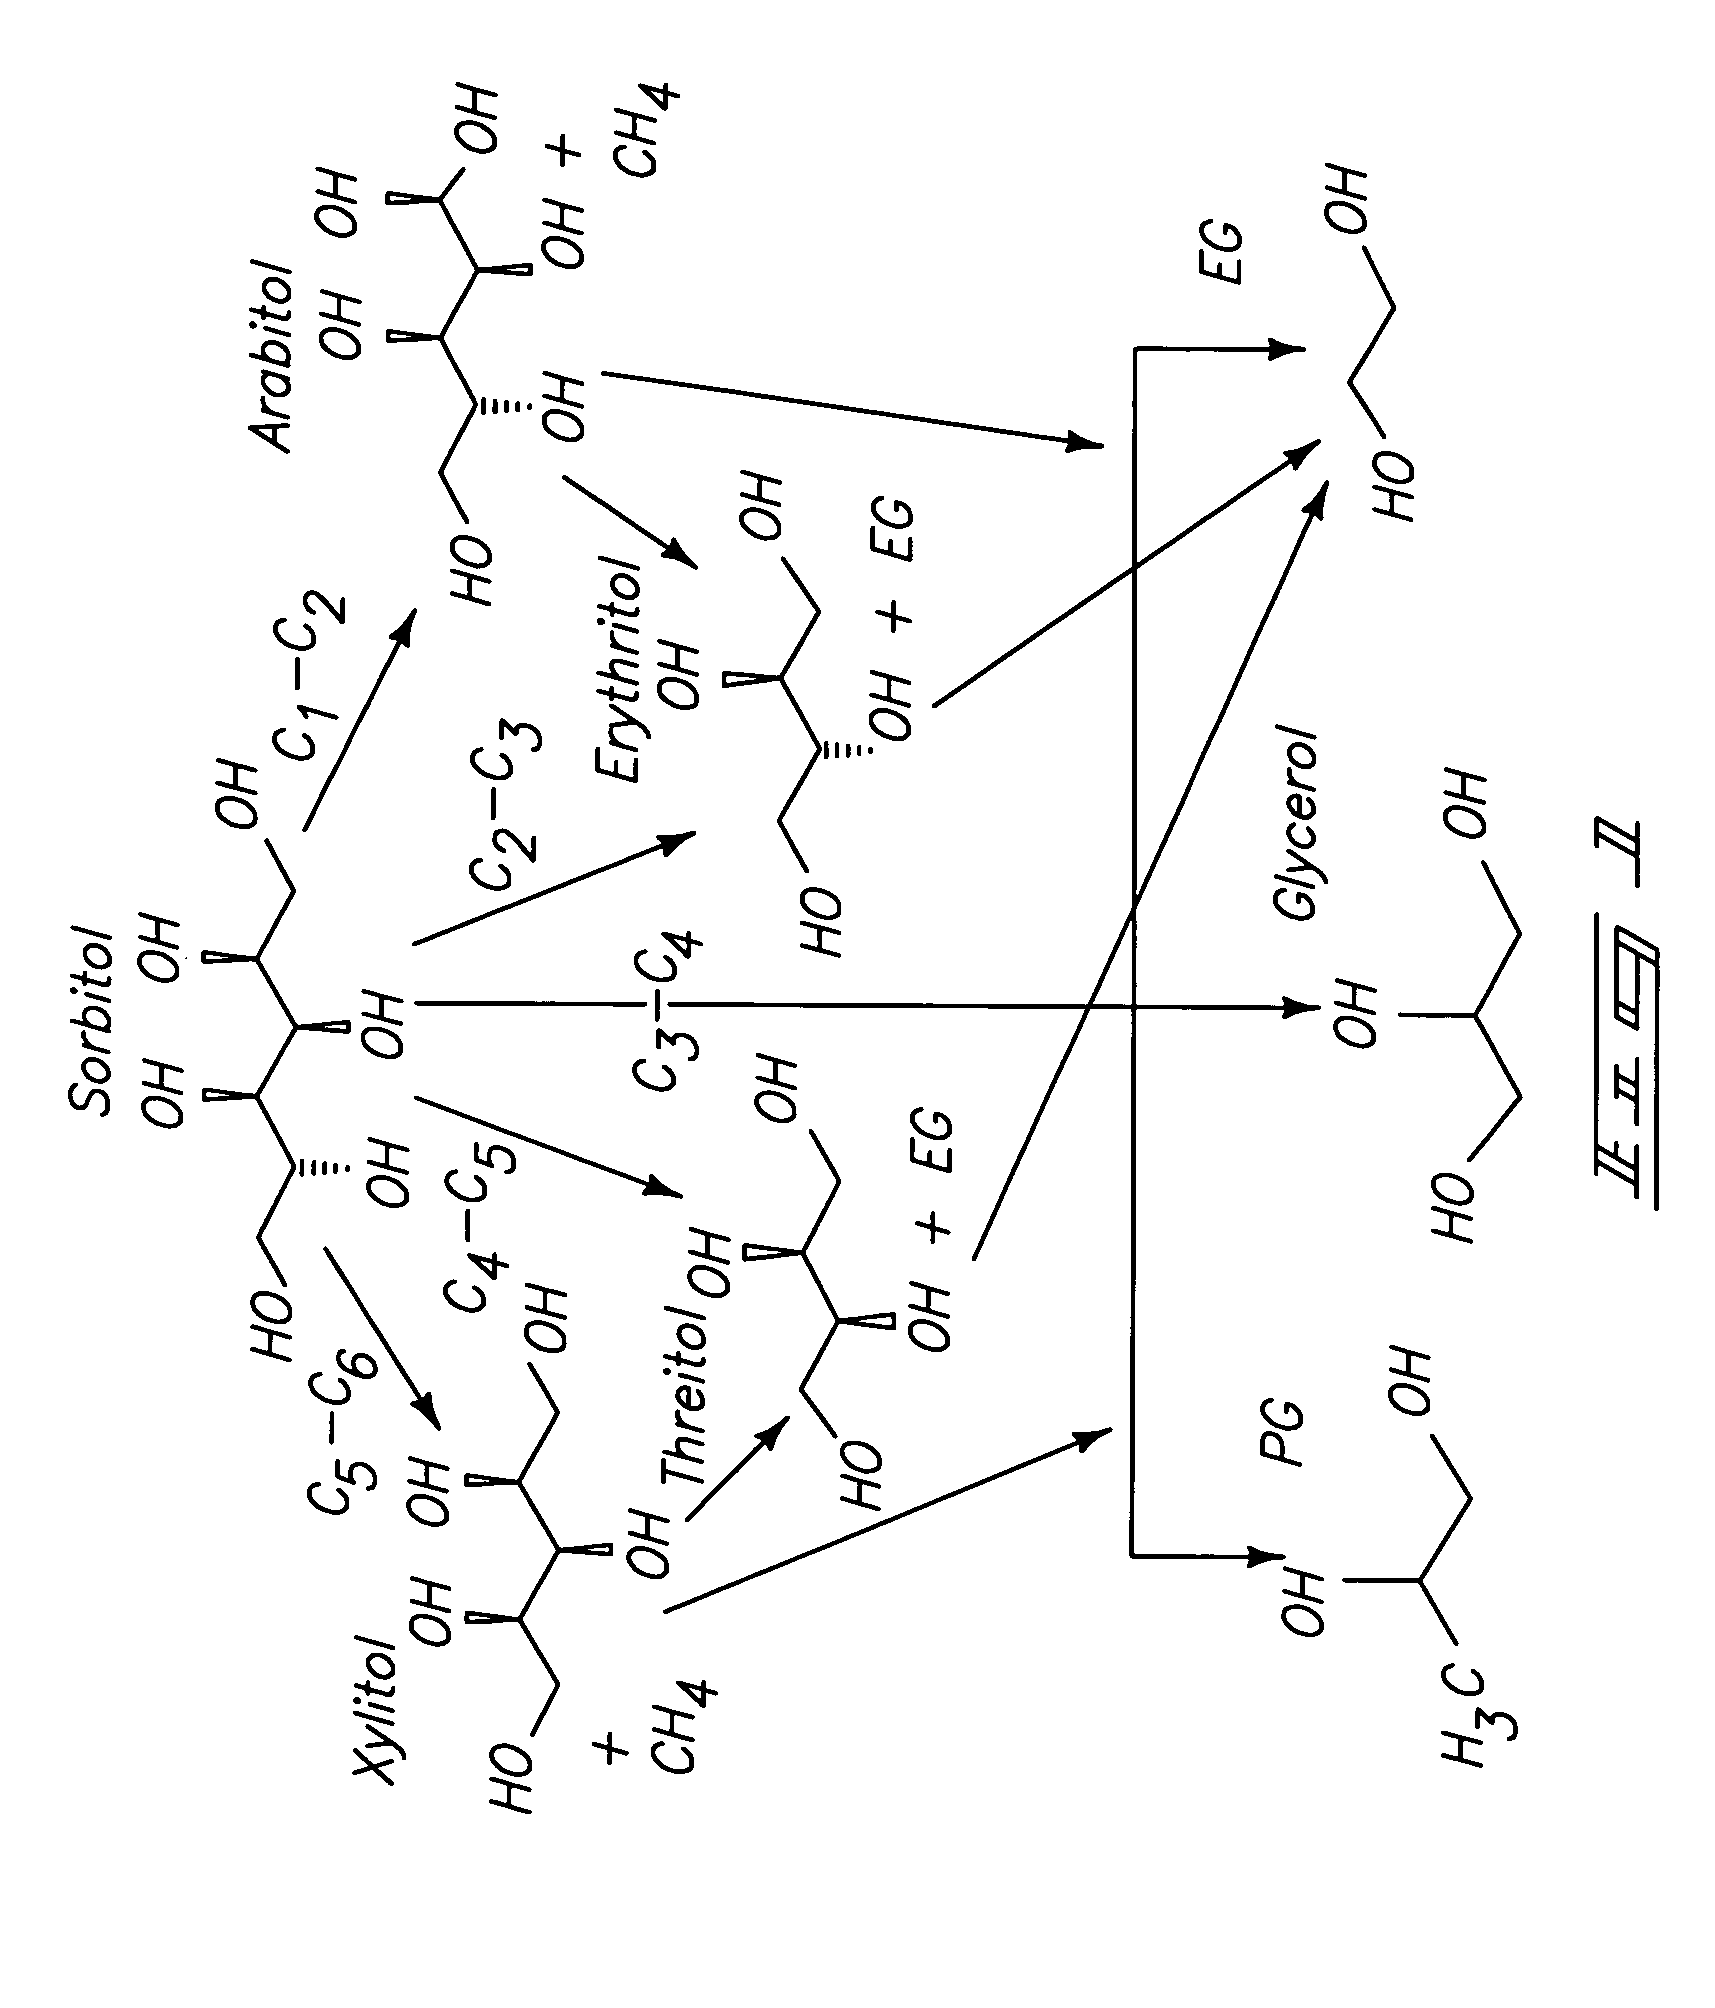 Hydrogenolysis of 5-carbon sugars, sugar alcohols, and methods of making propylene glycol